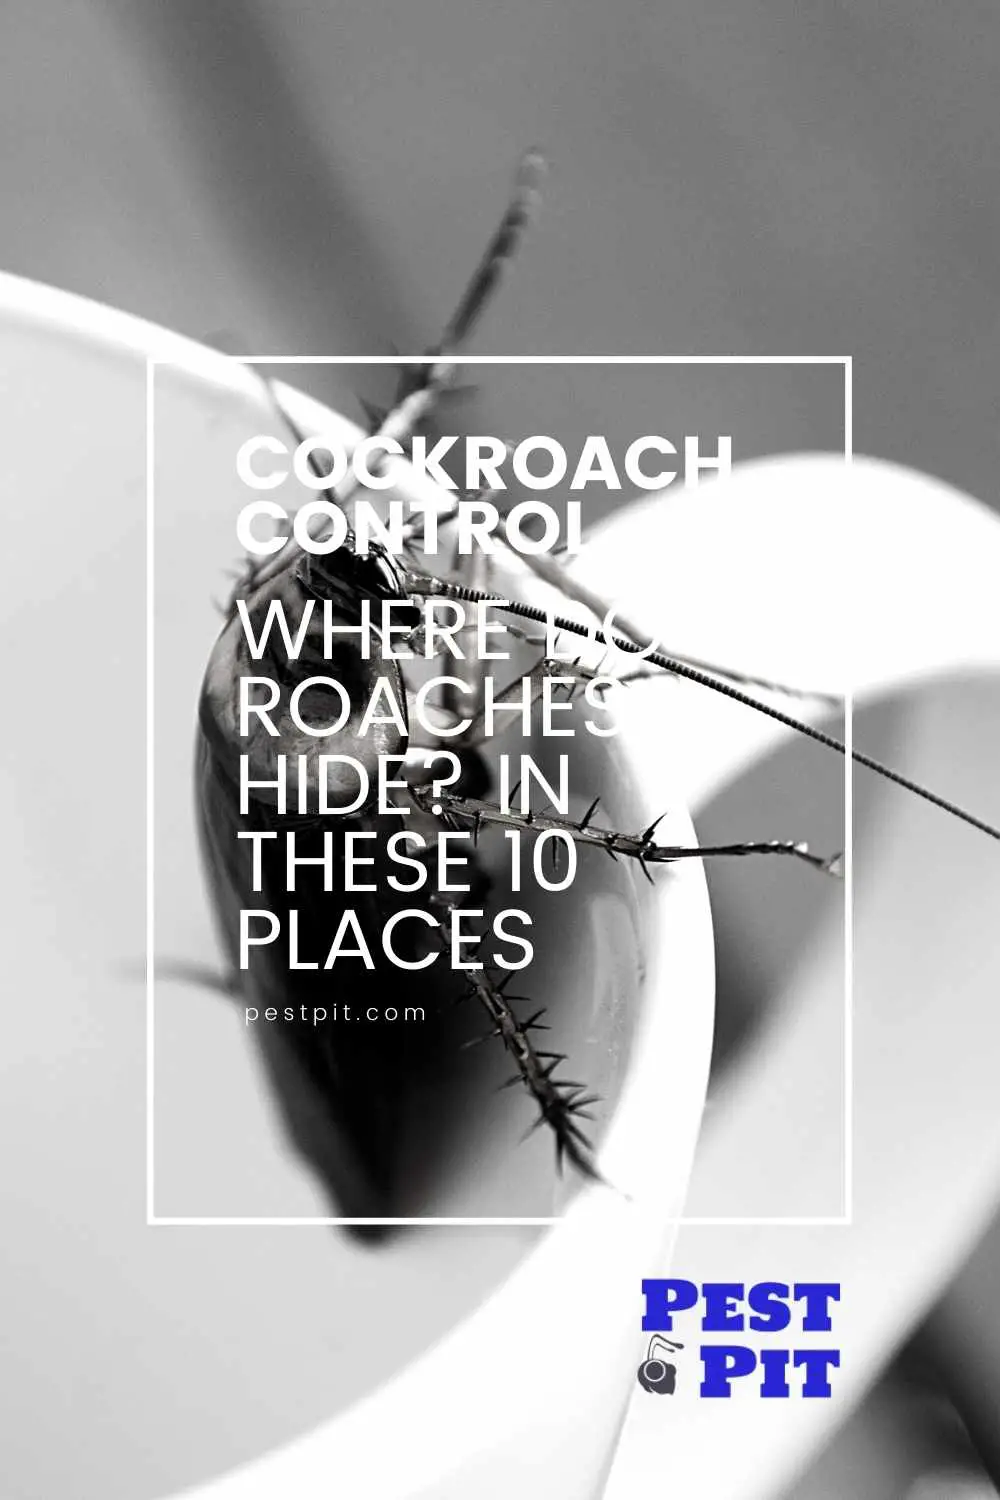 Where Do Roaches Hide In these 10 Places